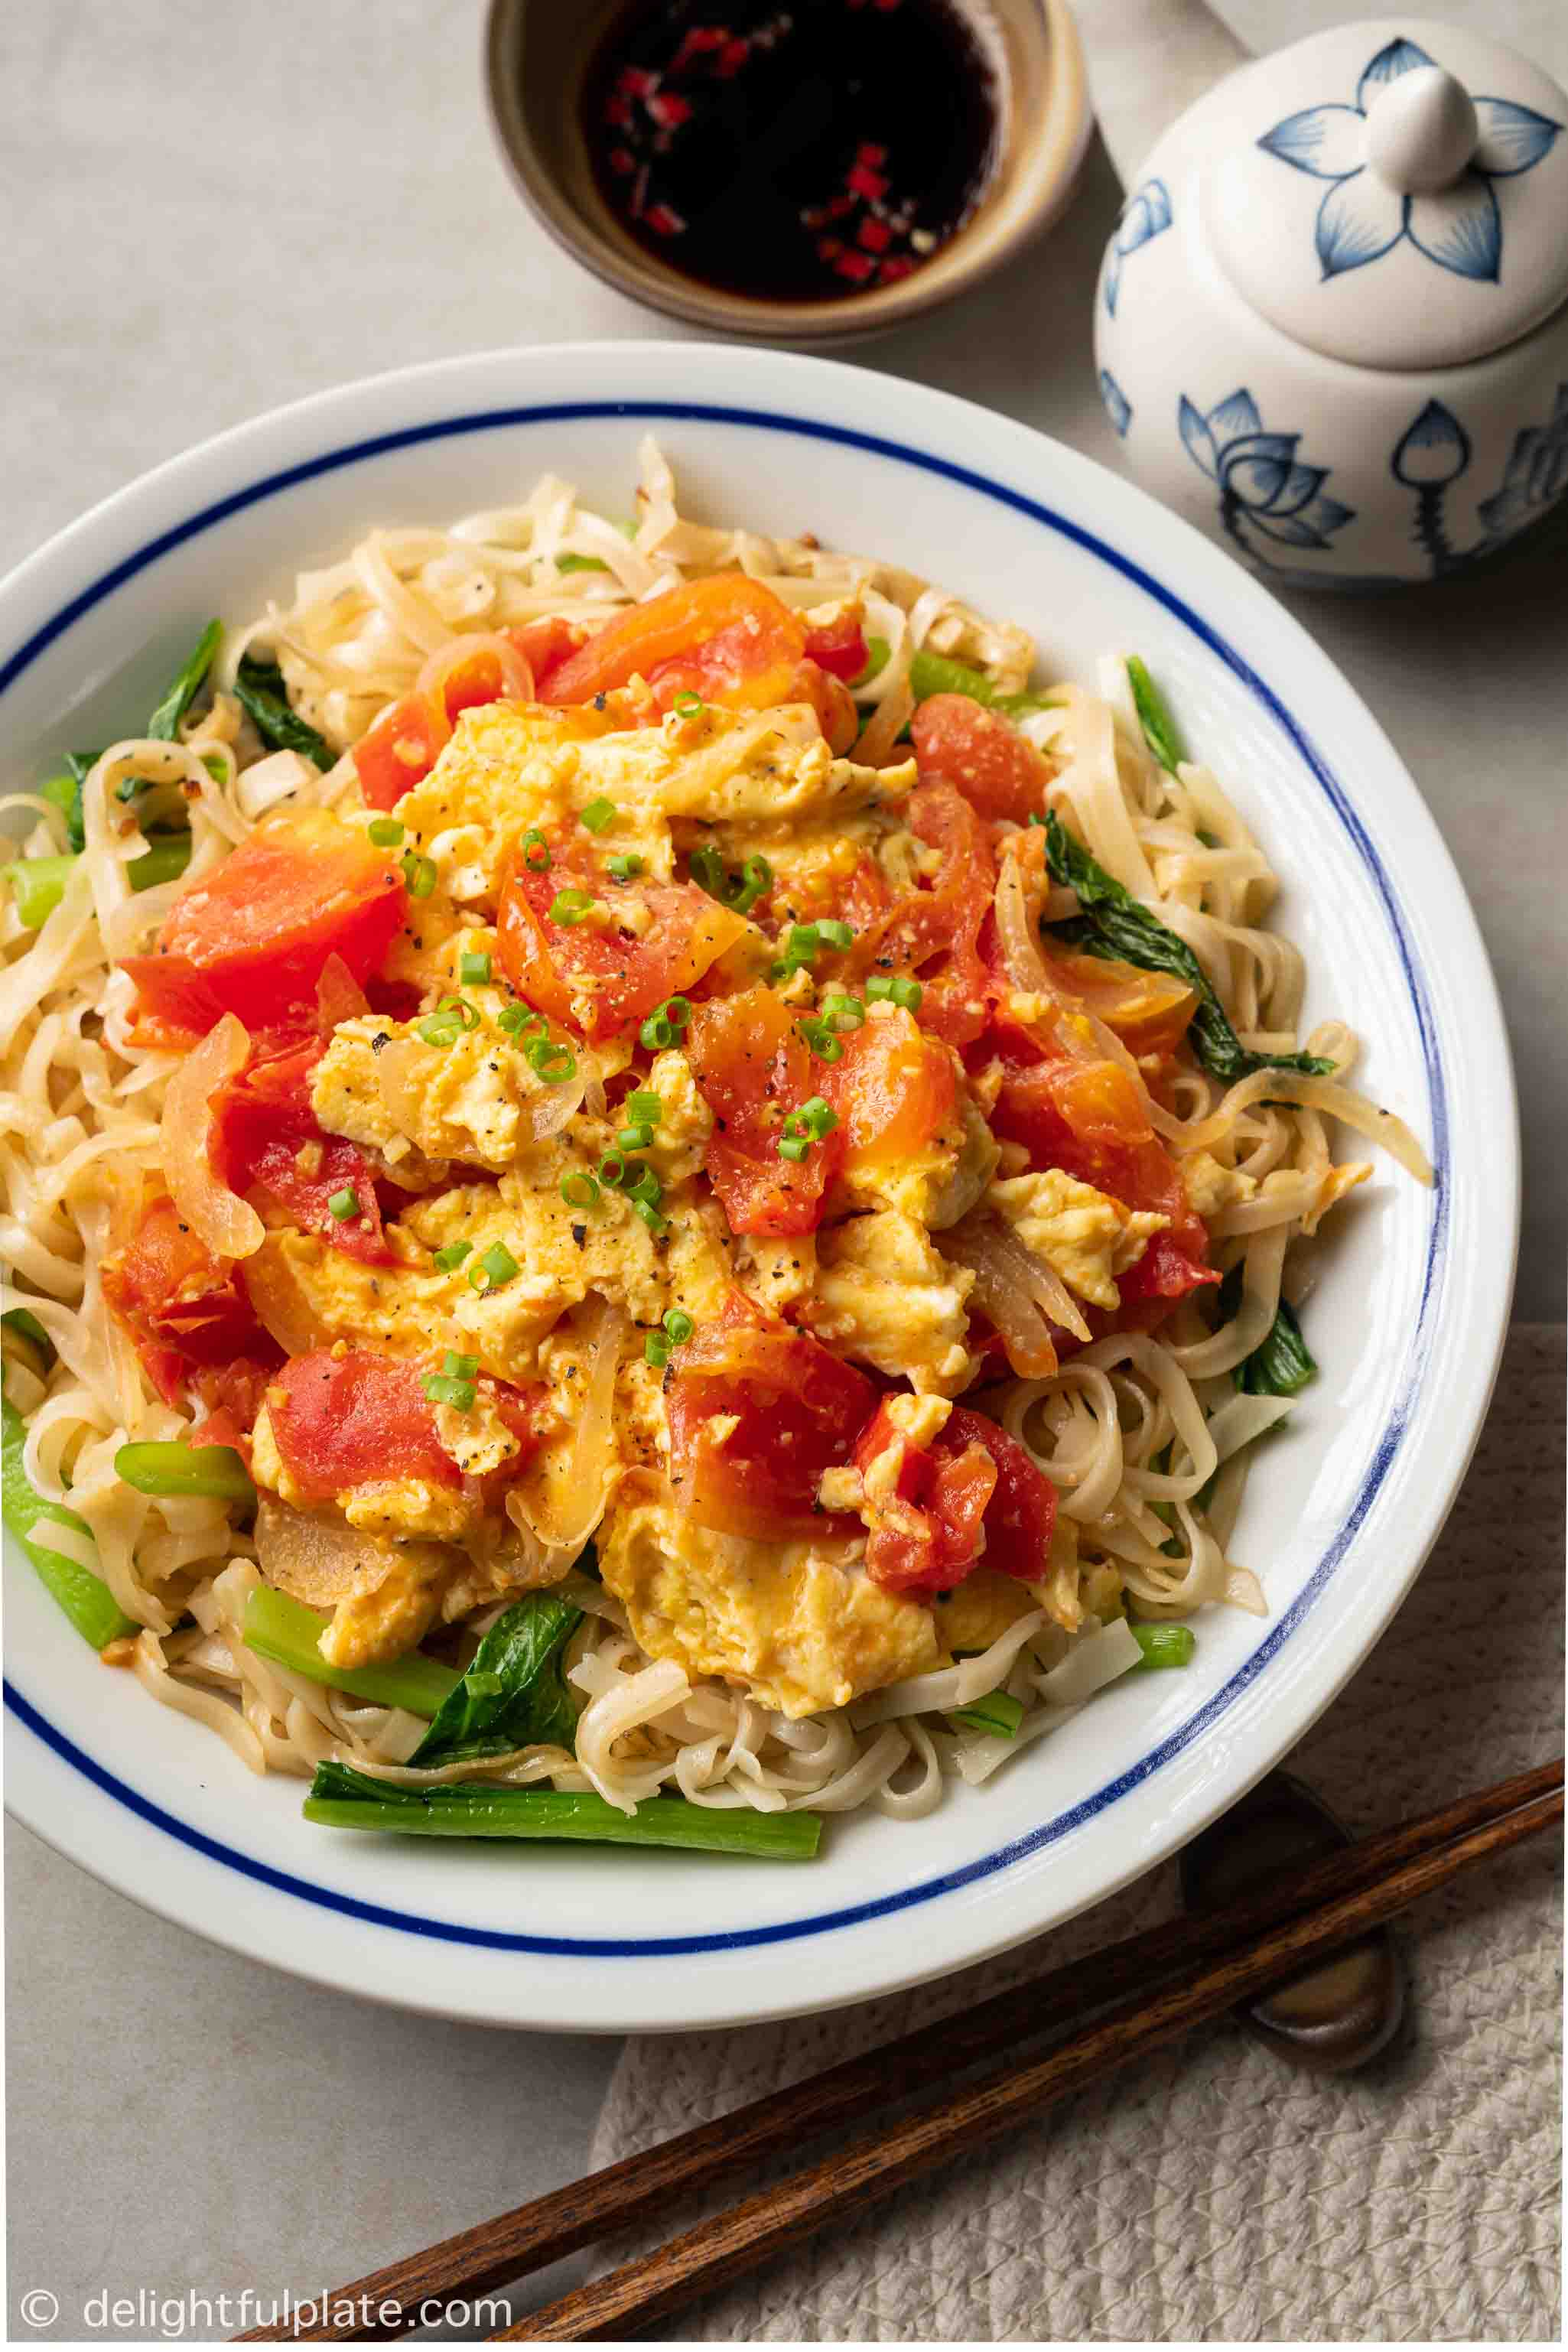 a plate of tomato and egg stir-fry with noodles